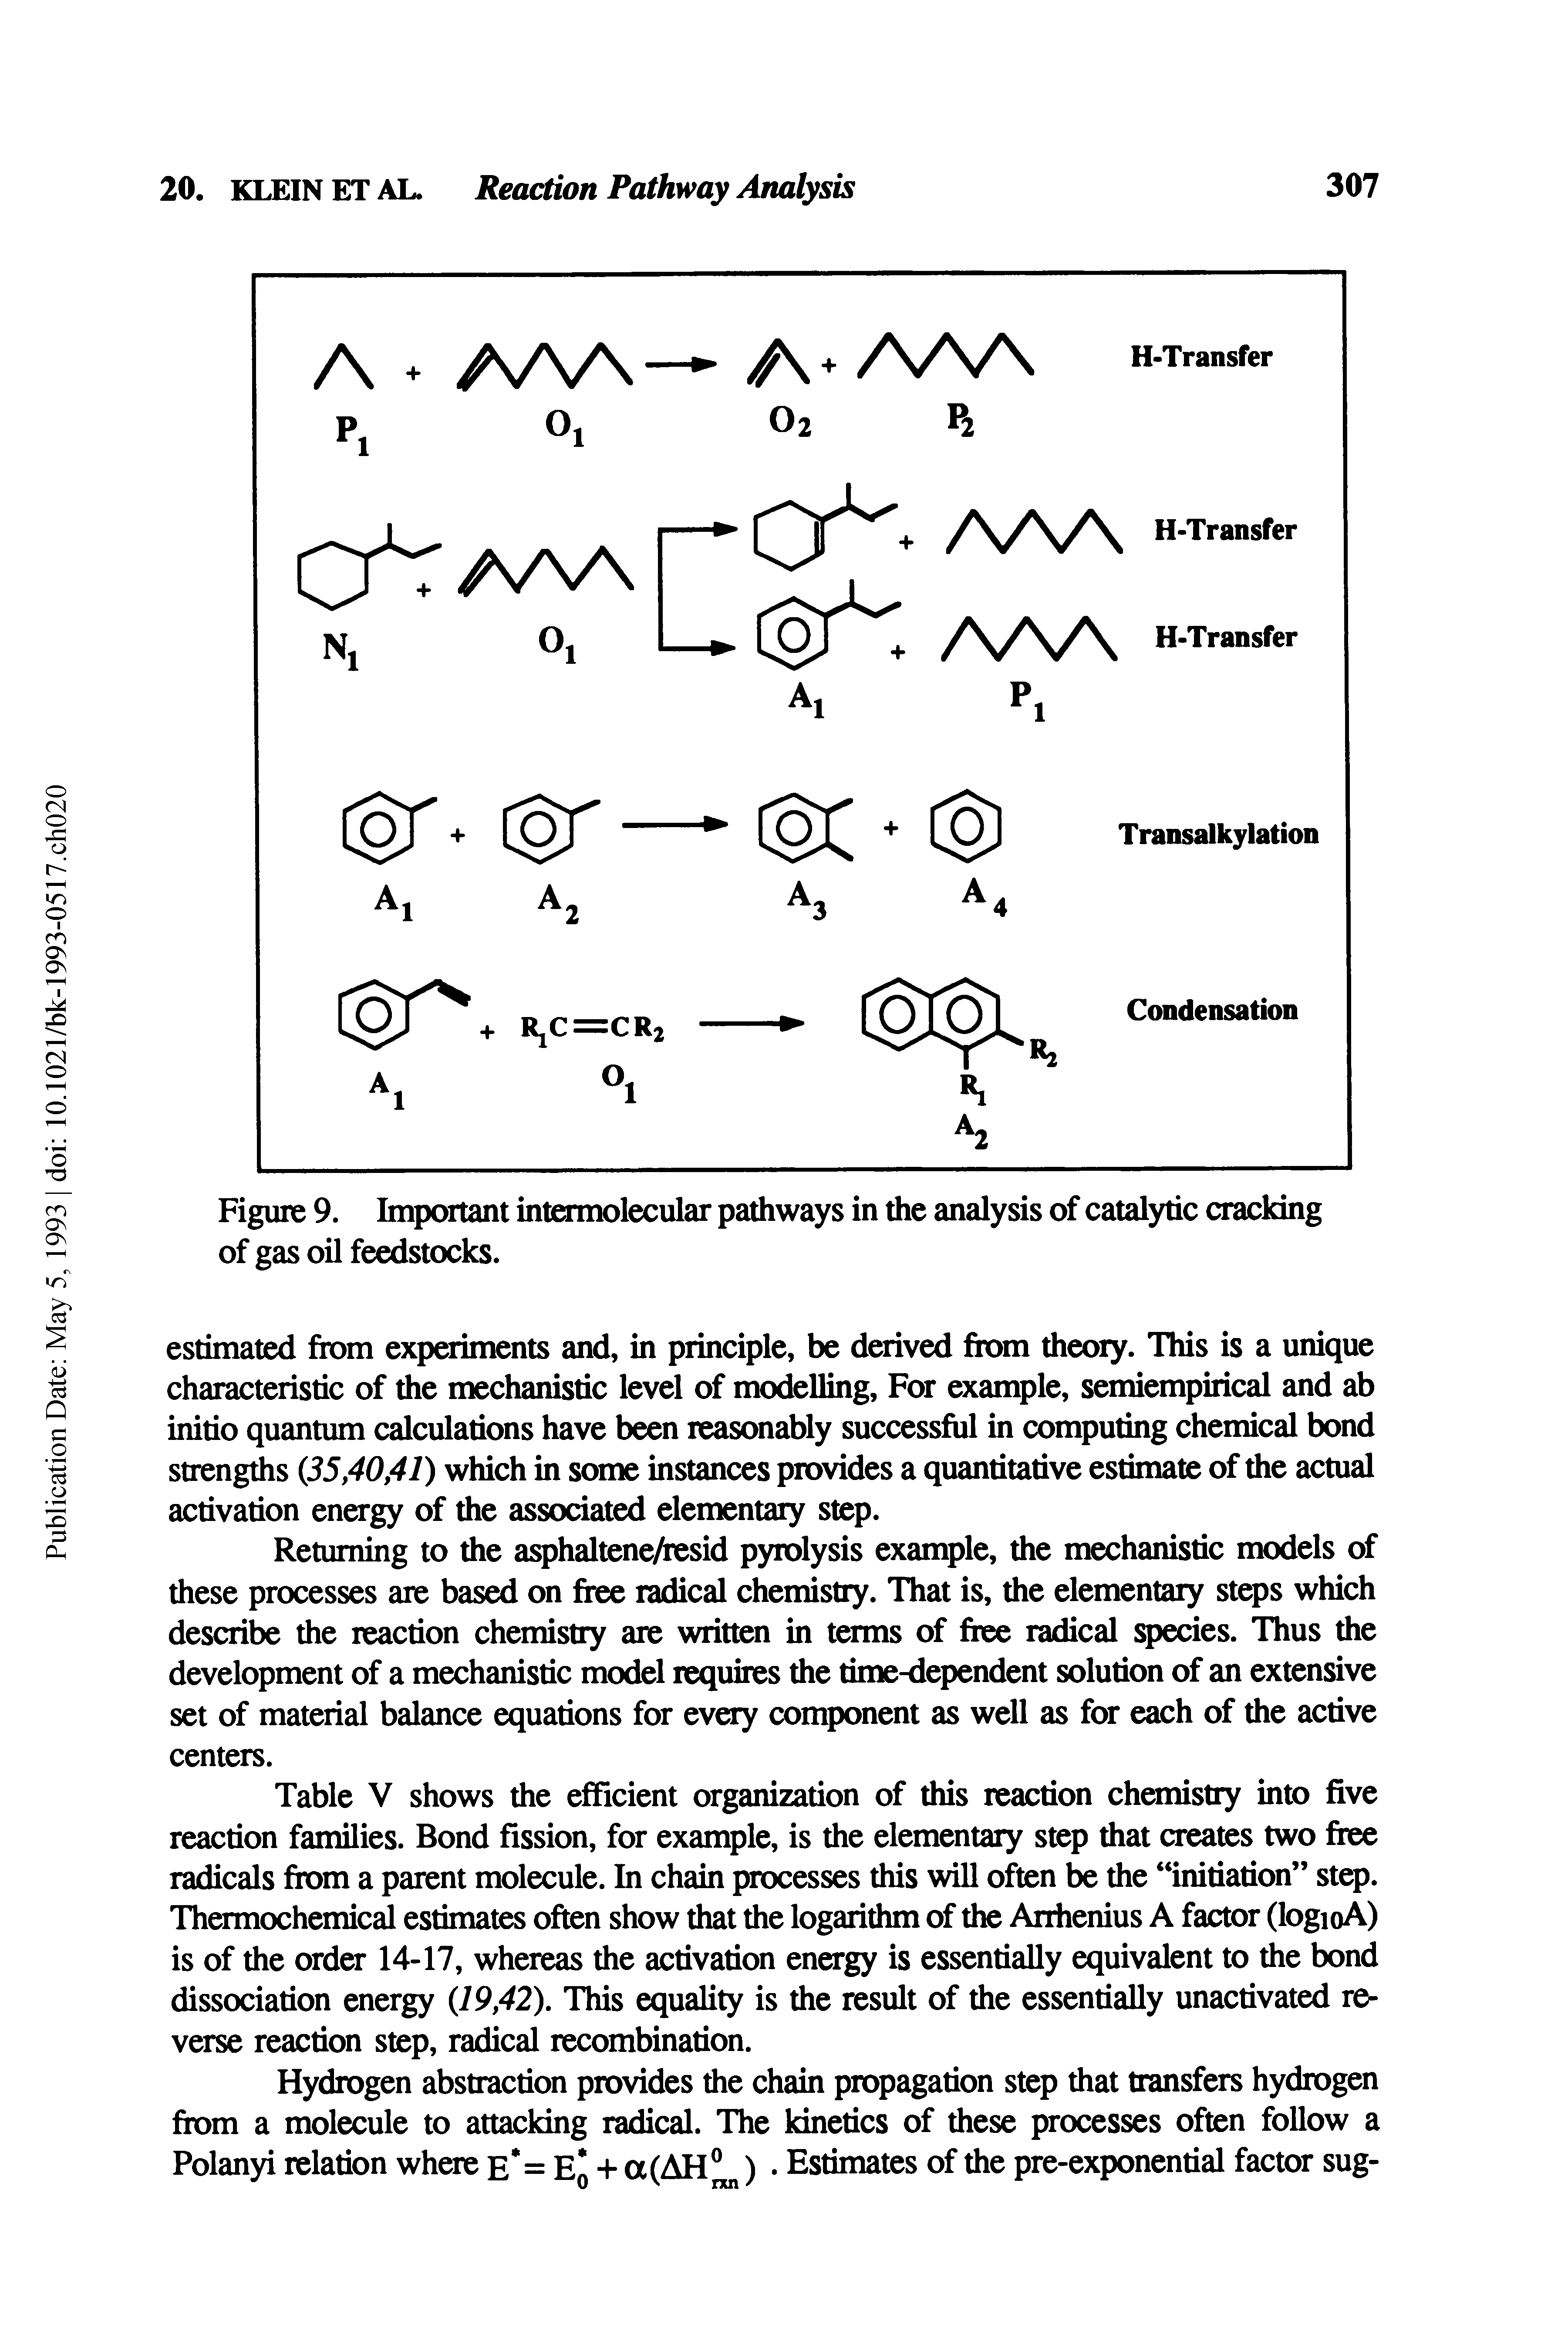 Table V shows the efficient organization of this reaction chemistry into five reaction families. Bond fission, for example, is the elementary step that creates two free radicals from a parent molecule. In chain processes this will often be the initiation step. Thermochemical estimates often show that the logarithm of the Arrhenius A factor (logioA) is of the order 14-17, whereas the activation energy is essentially equivalent to the bond dissociation energy (19,42). This equality is the result of the essentially unactivated reverse reaction step, radical recombination.